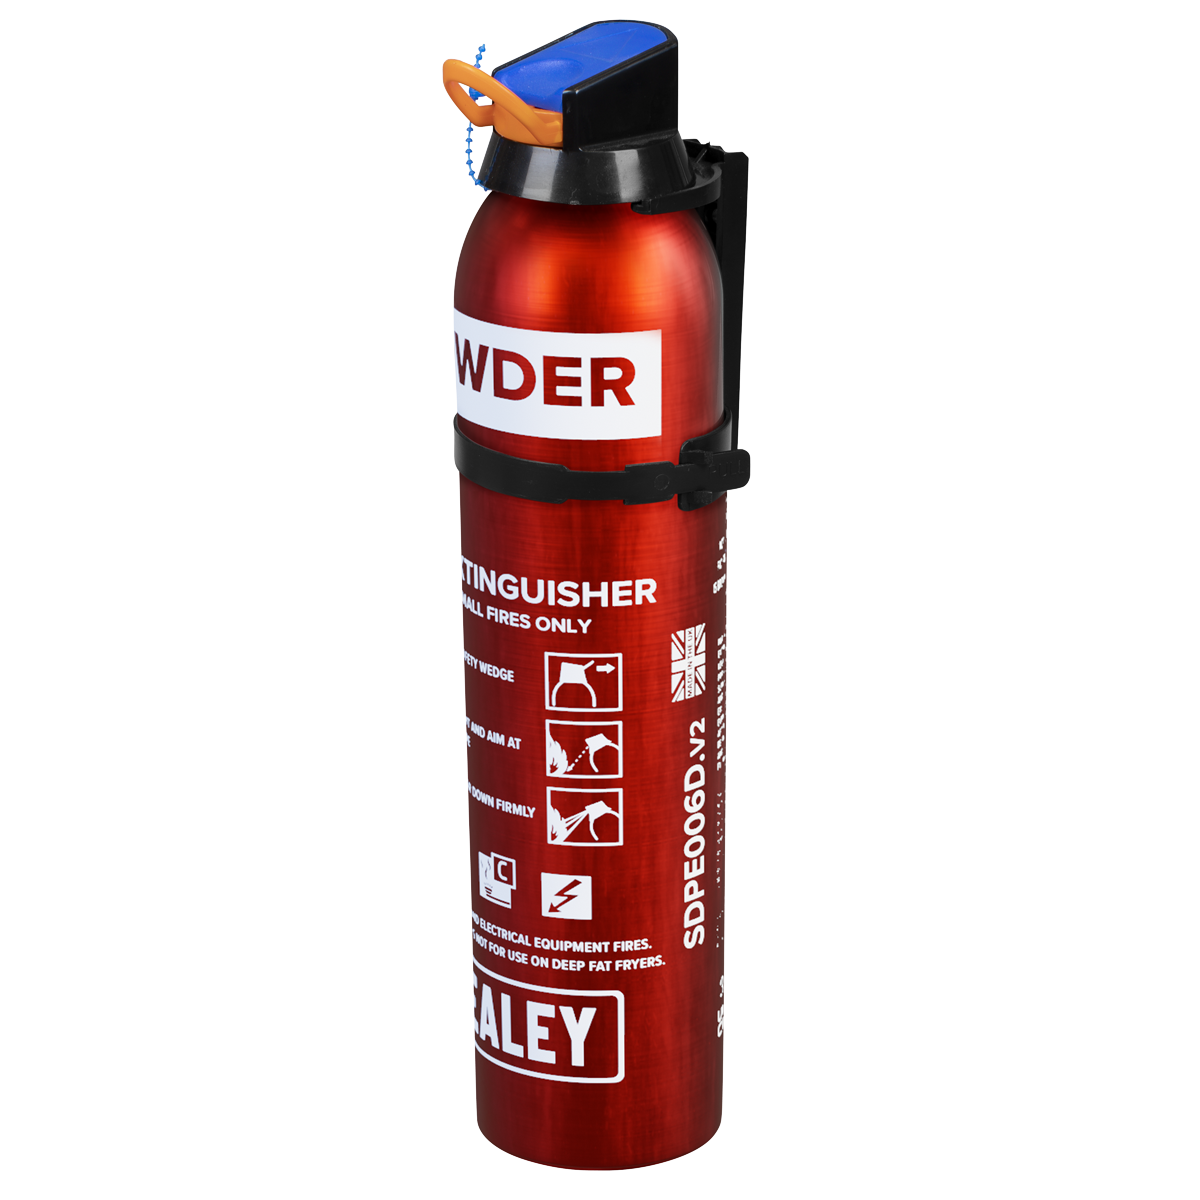 Fire Extinguisher 0.6kg Dry Powder - Disposable